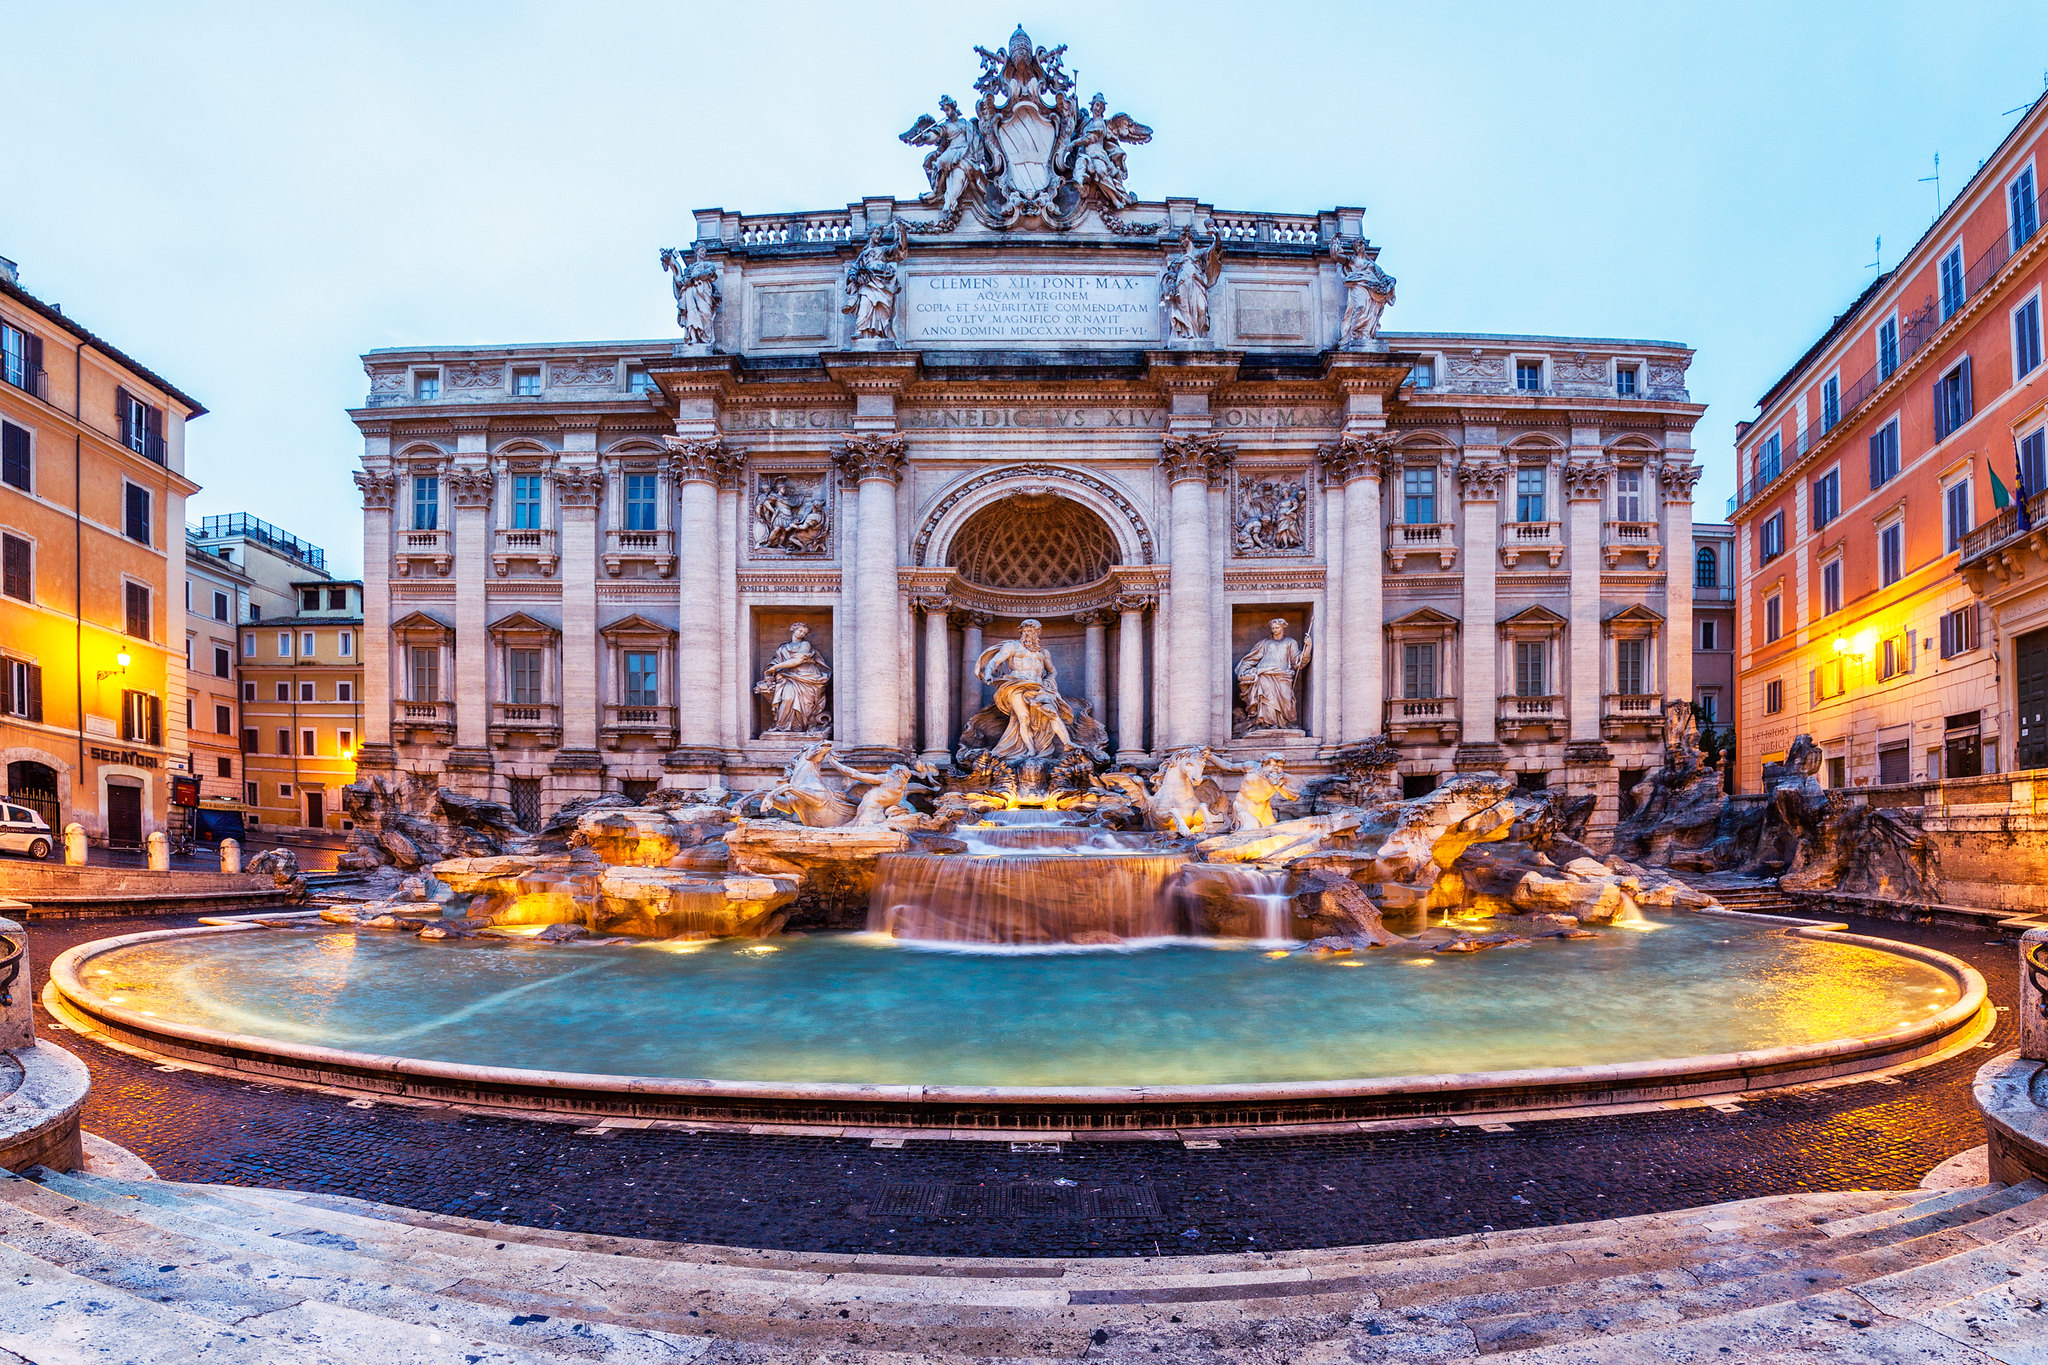 <p>If you believe Trevi Fountain is an attraction not to be missed, then <strong>your best bet is to visit as the sun rises. </strong>Beat the crowds and you may find that this "overrated" attraction is actually well worth a visit.</p>